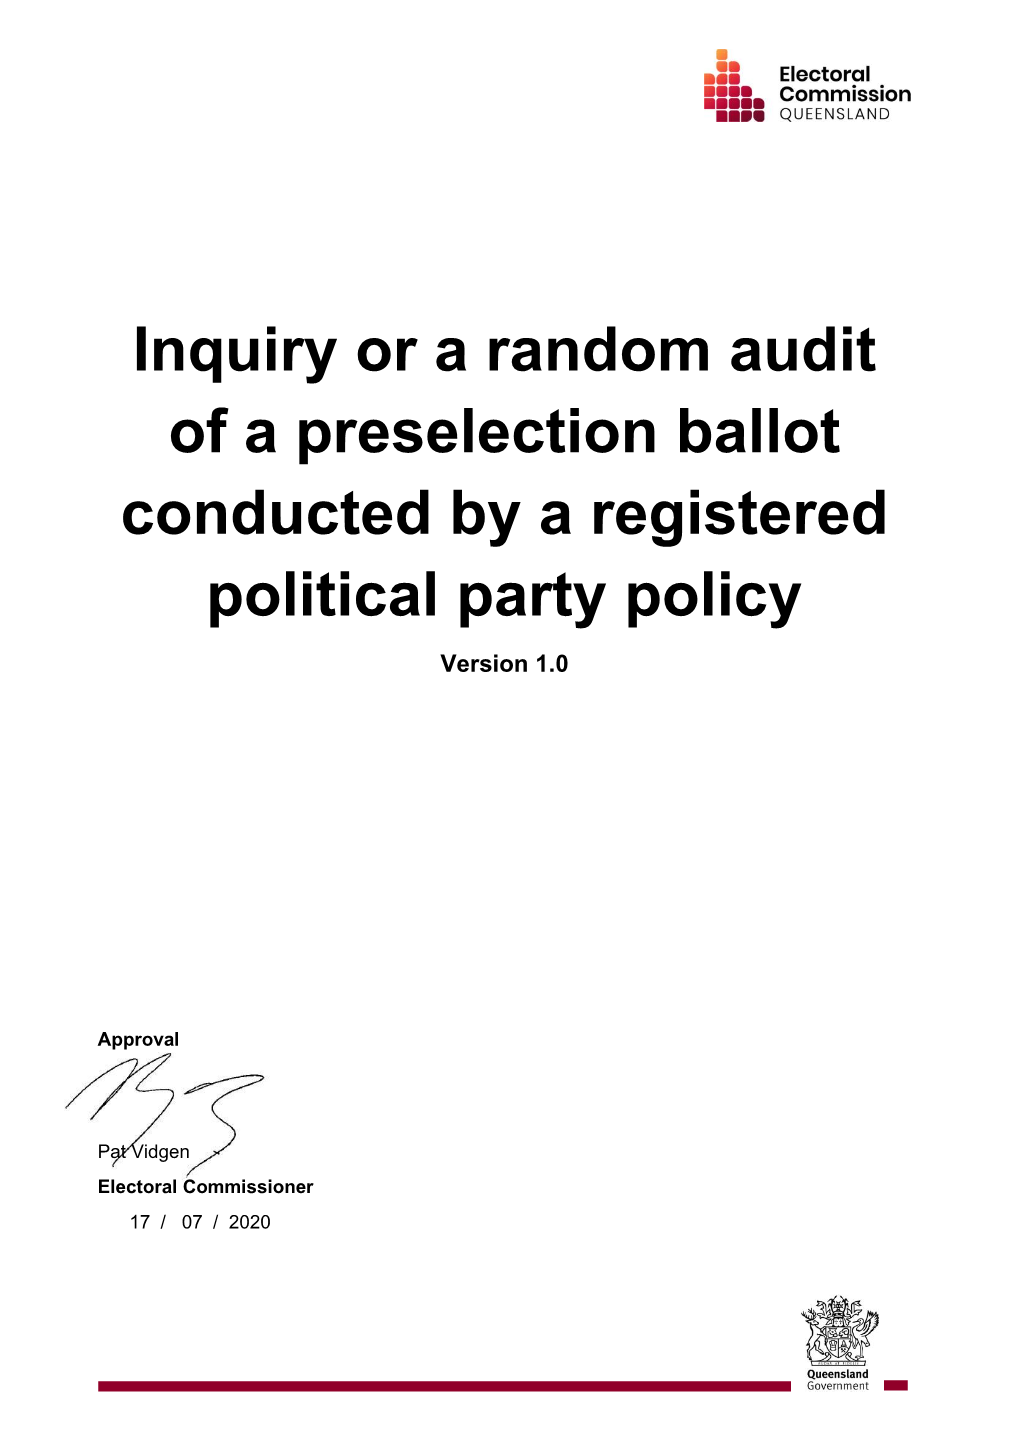 Inquiry Or a Random Audit of a Preselection Ballot Conducted by a Registered Political Party Policy